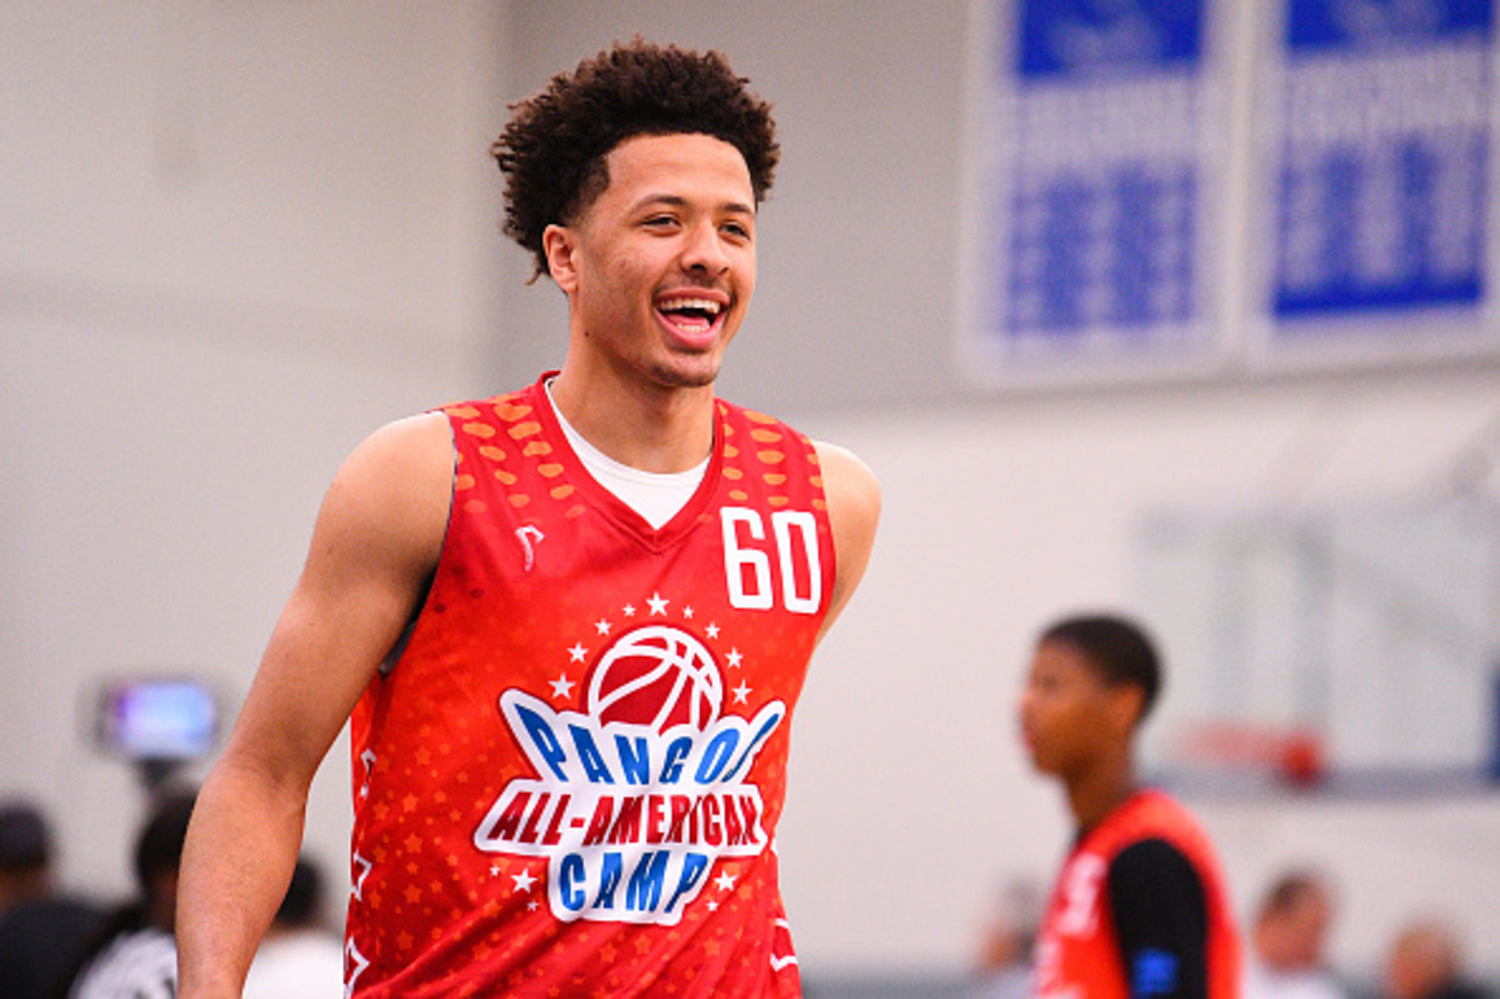 Cade Cunningham is projected to be the No. 1 draft pick in the 2021 NBA draft